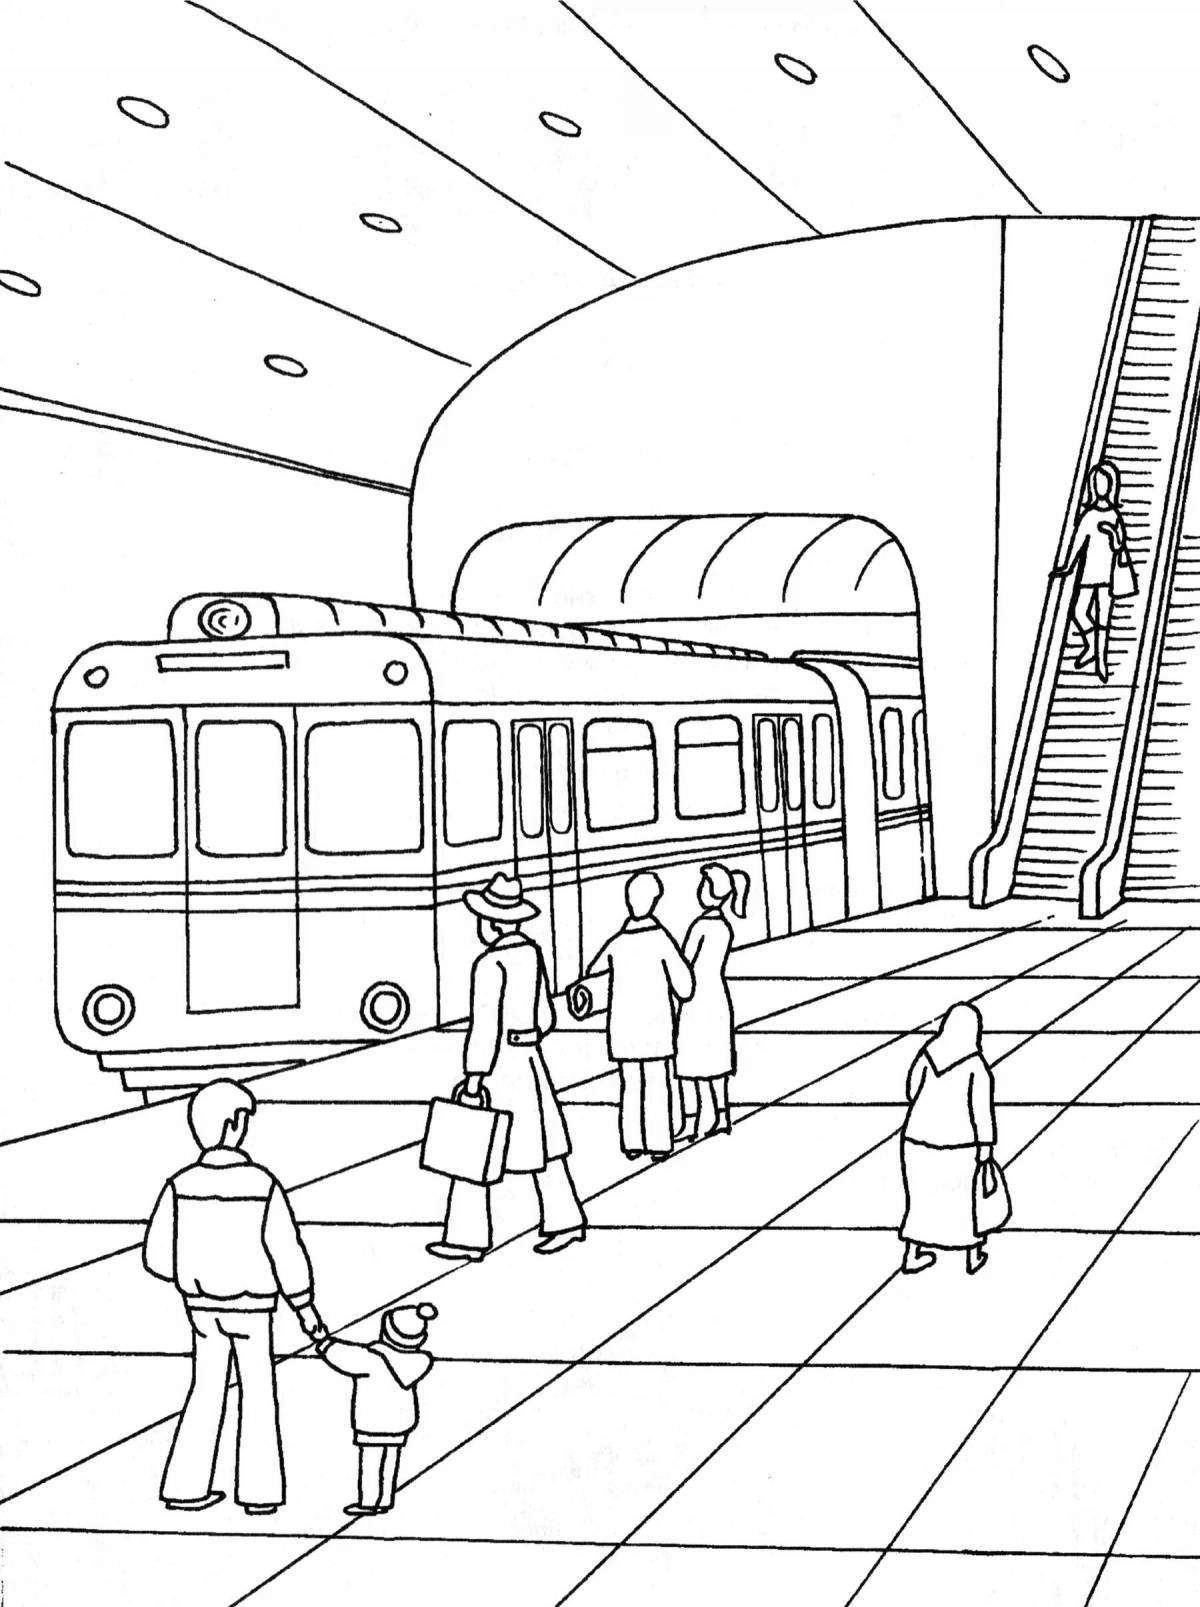 Coloring page charming train station